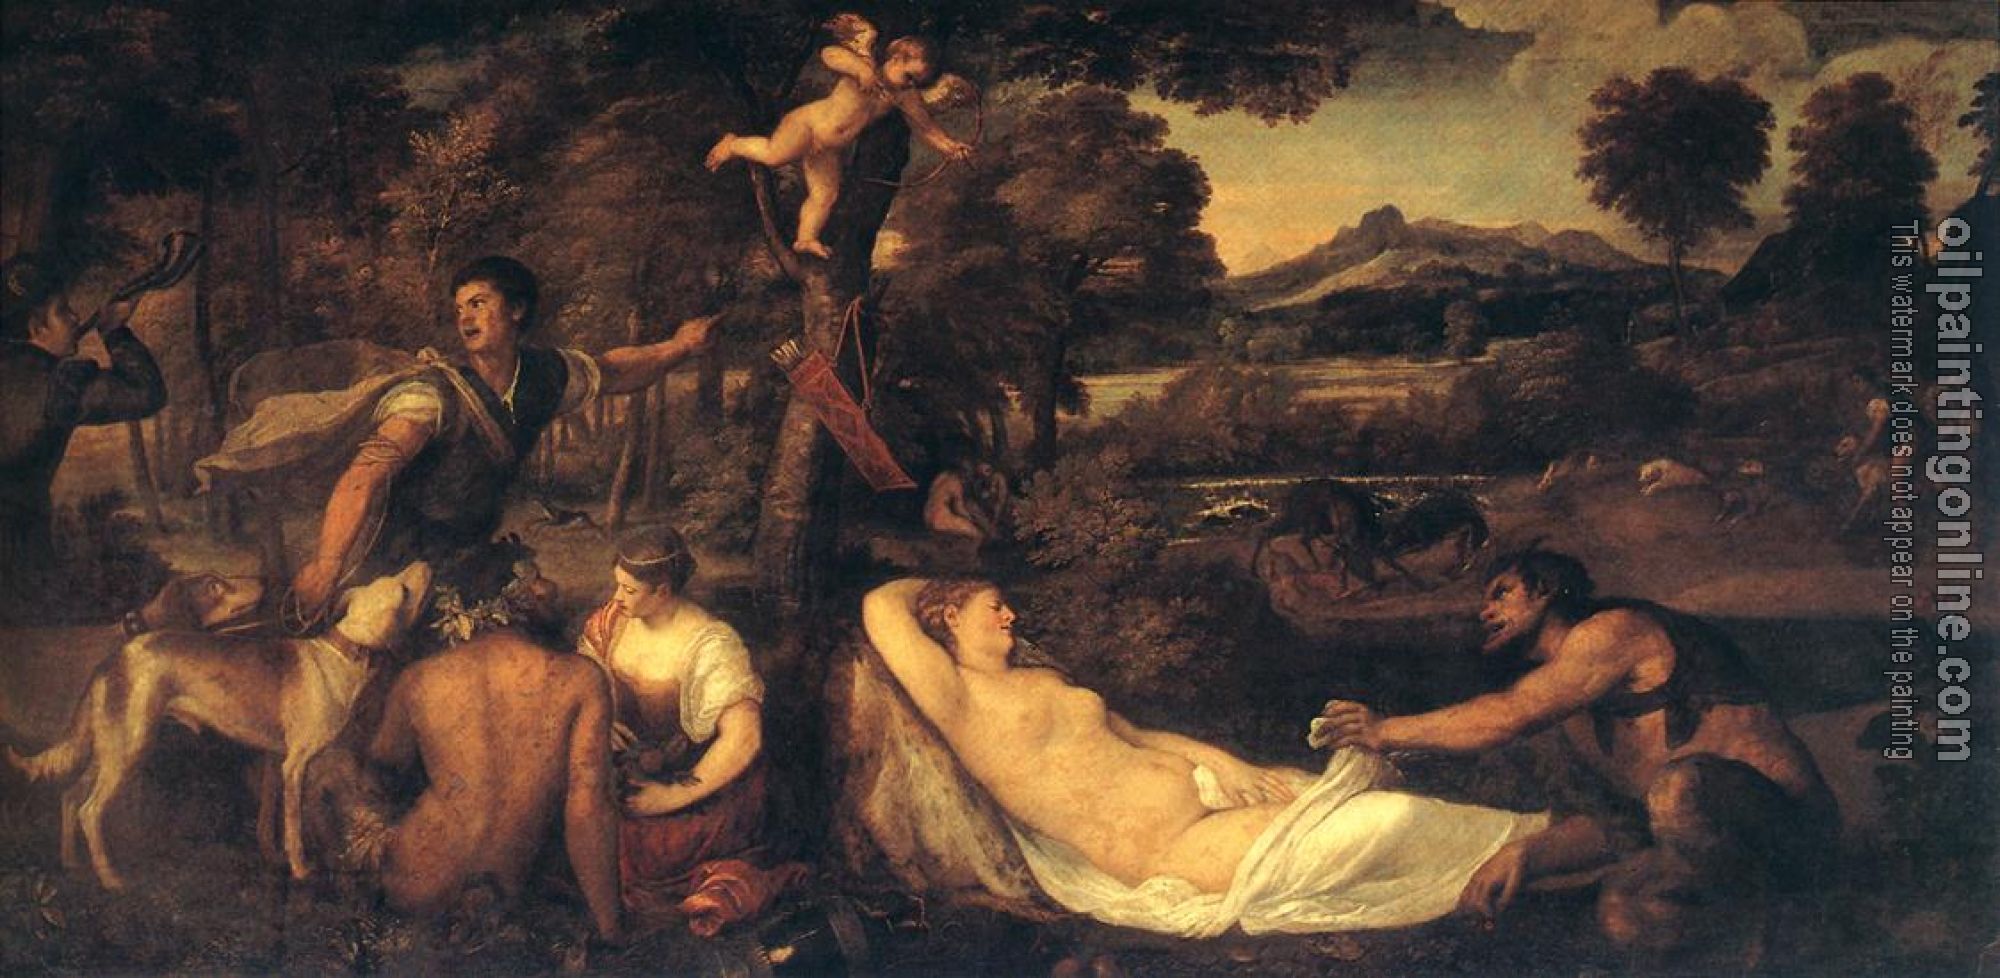 Titian - Jupiter and Anthiope